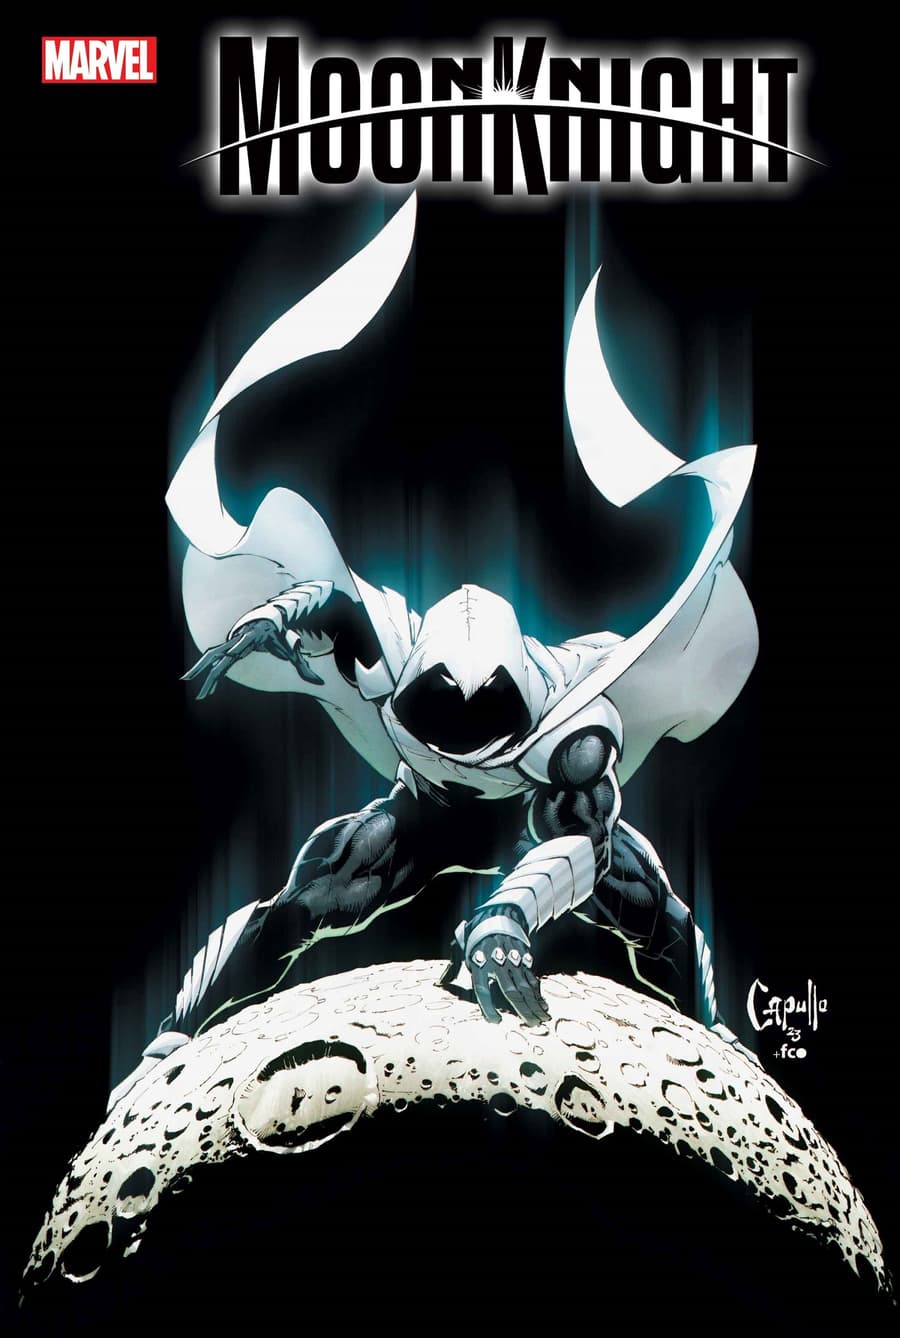 Variant cover to MOON KNIGHT (2021) #30 by Greg Capullo.